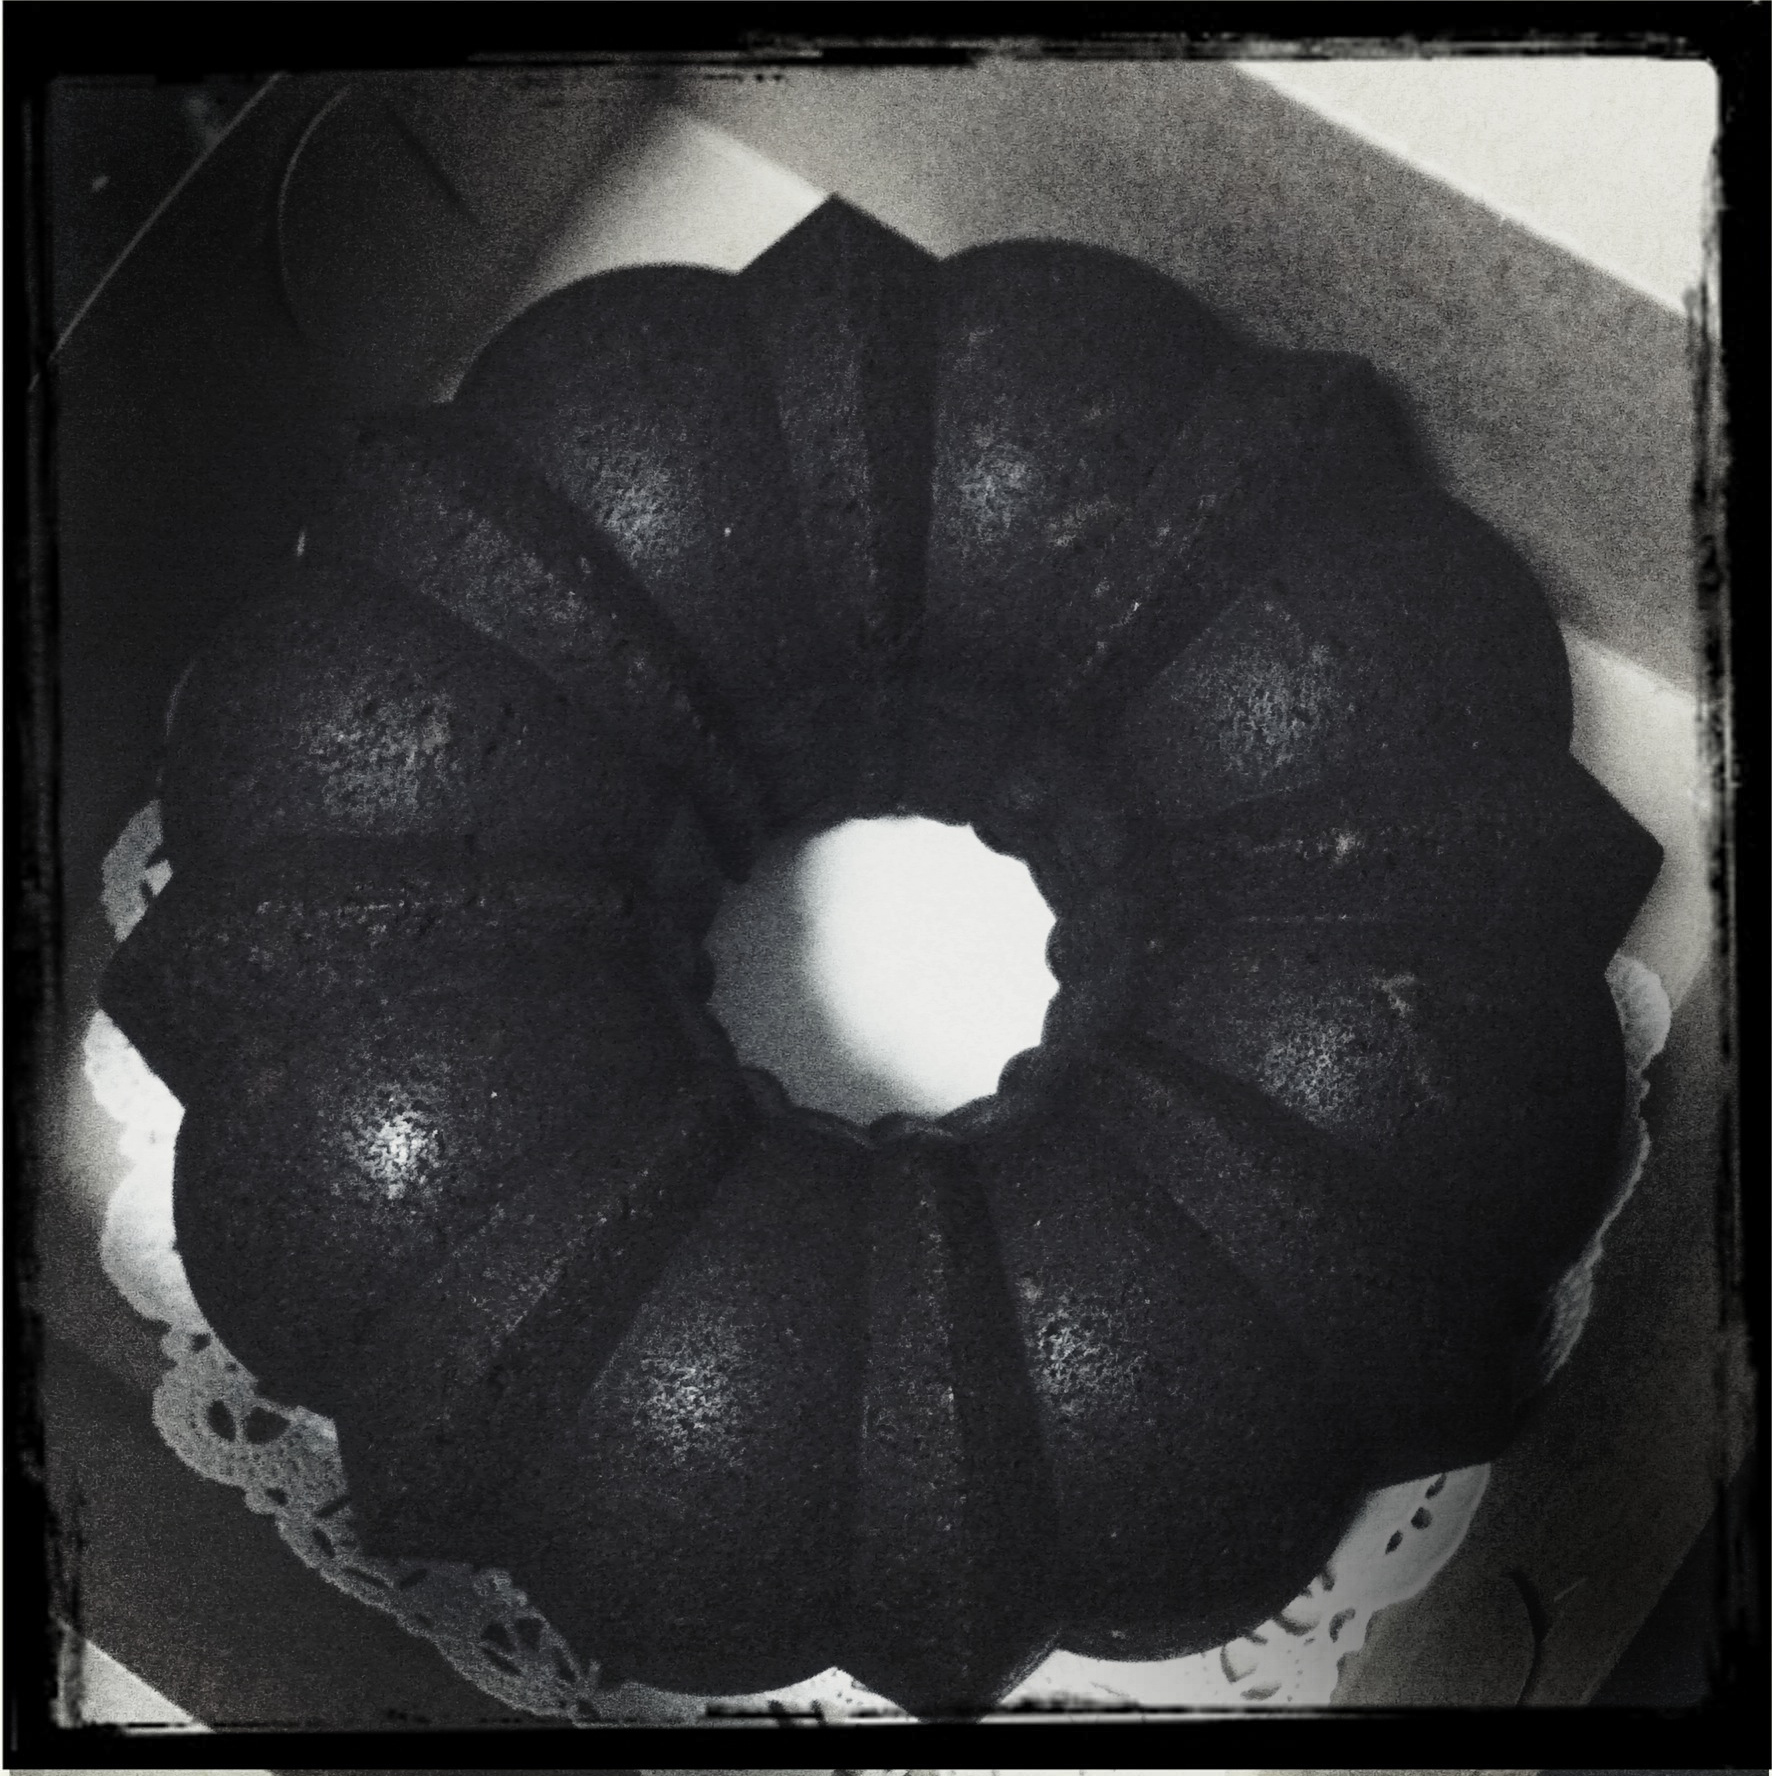 Liza made this awesome looking (and tasting) vegan chocolate bundt cake.